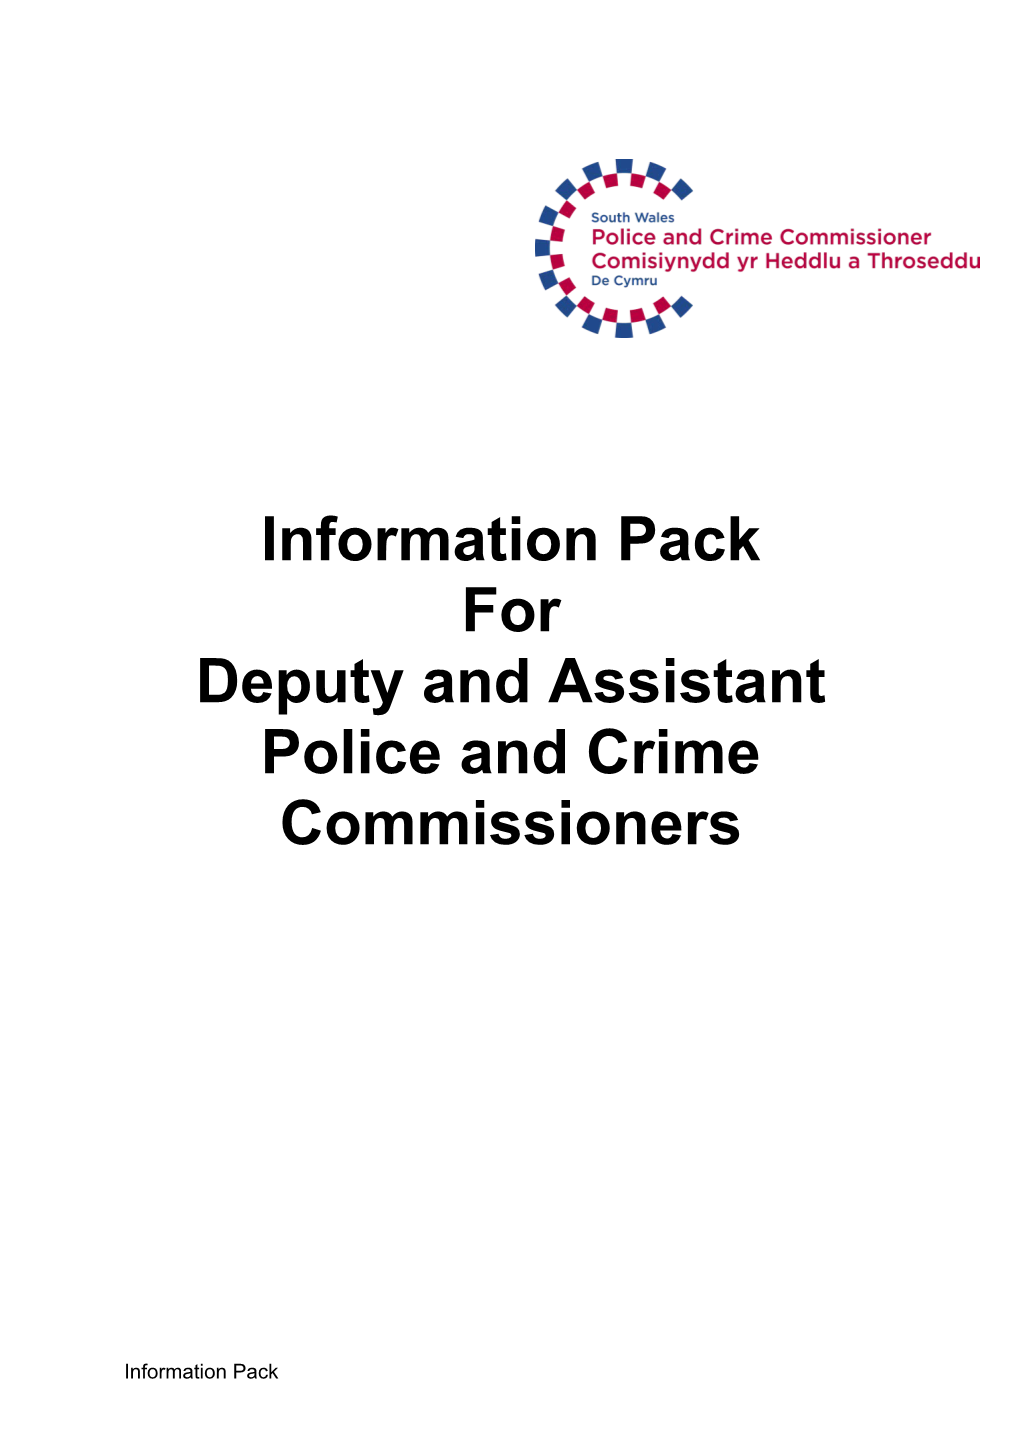 Deputy and Assistant Police and Crime Commissioner Information Pack